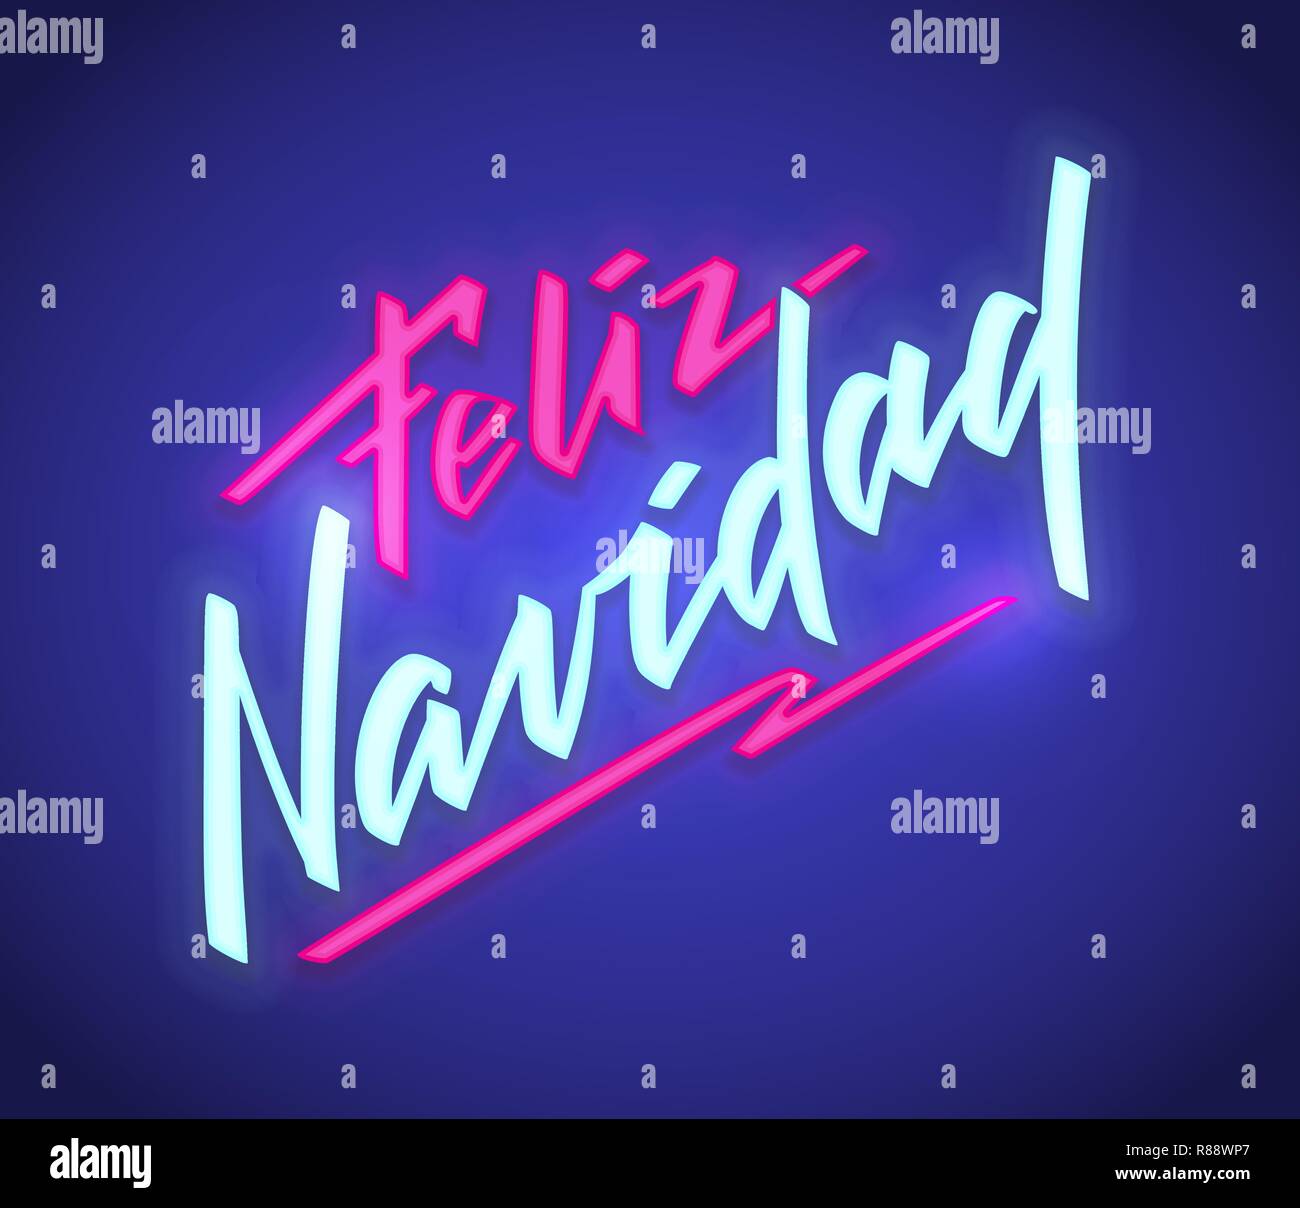 Feliz Navidad - Merry Christmas from Spanish, neon text sign. Vector background. Neon glowing signboard, bright luminous banner with lettering in hand-written style. For foto overlay, decoration. Stock Vector